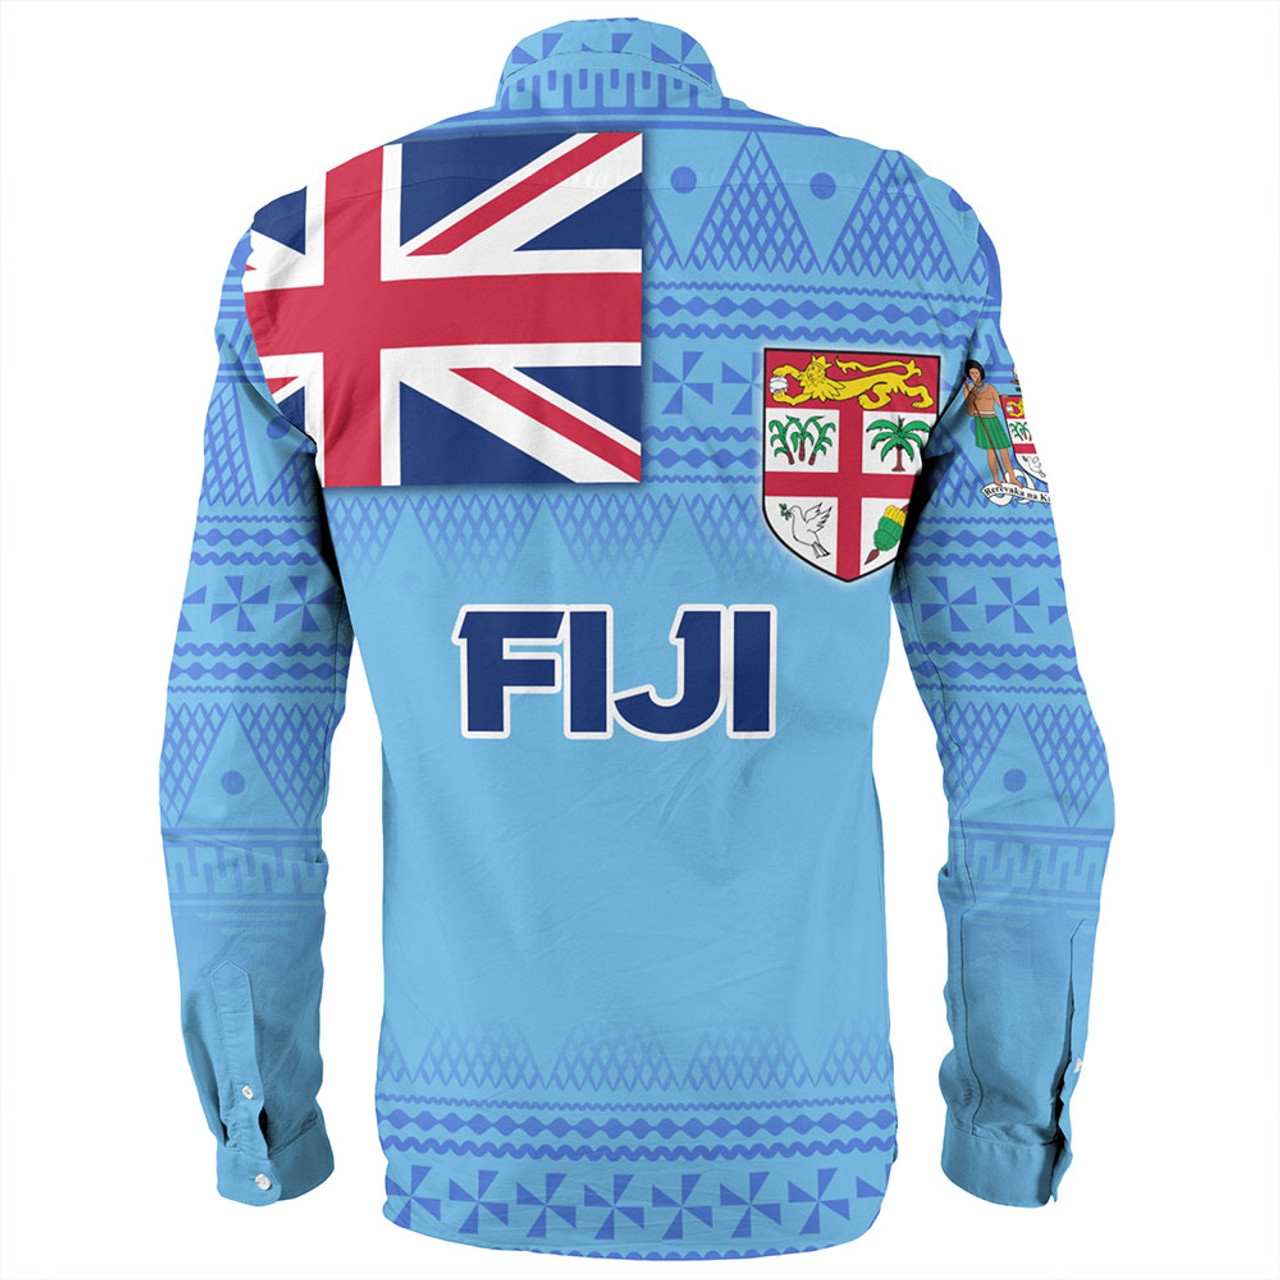 Fiji Long Sleeve Shirt - Flag Color With Traditional Patterns